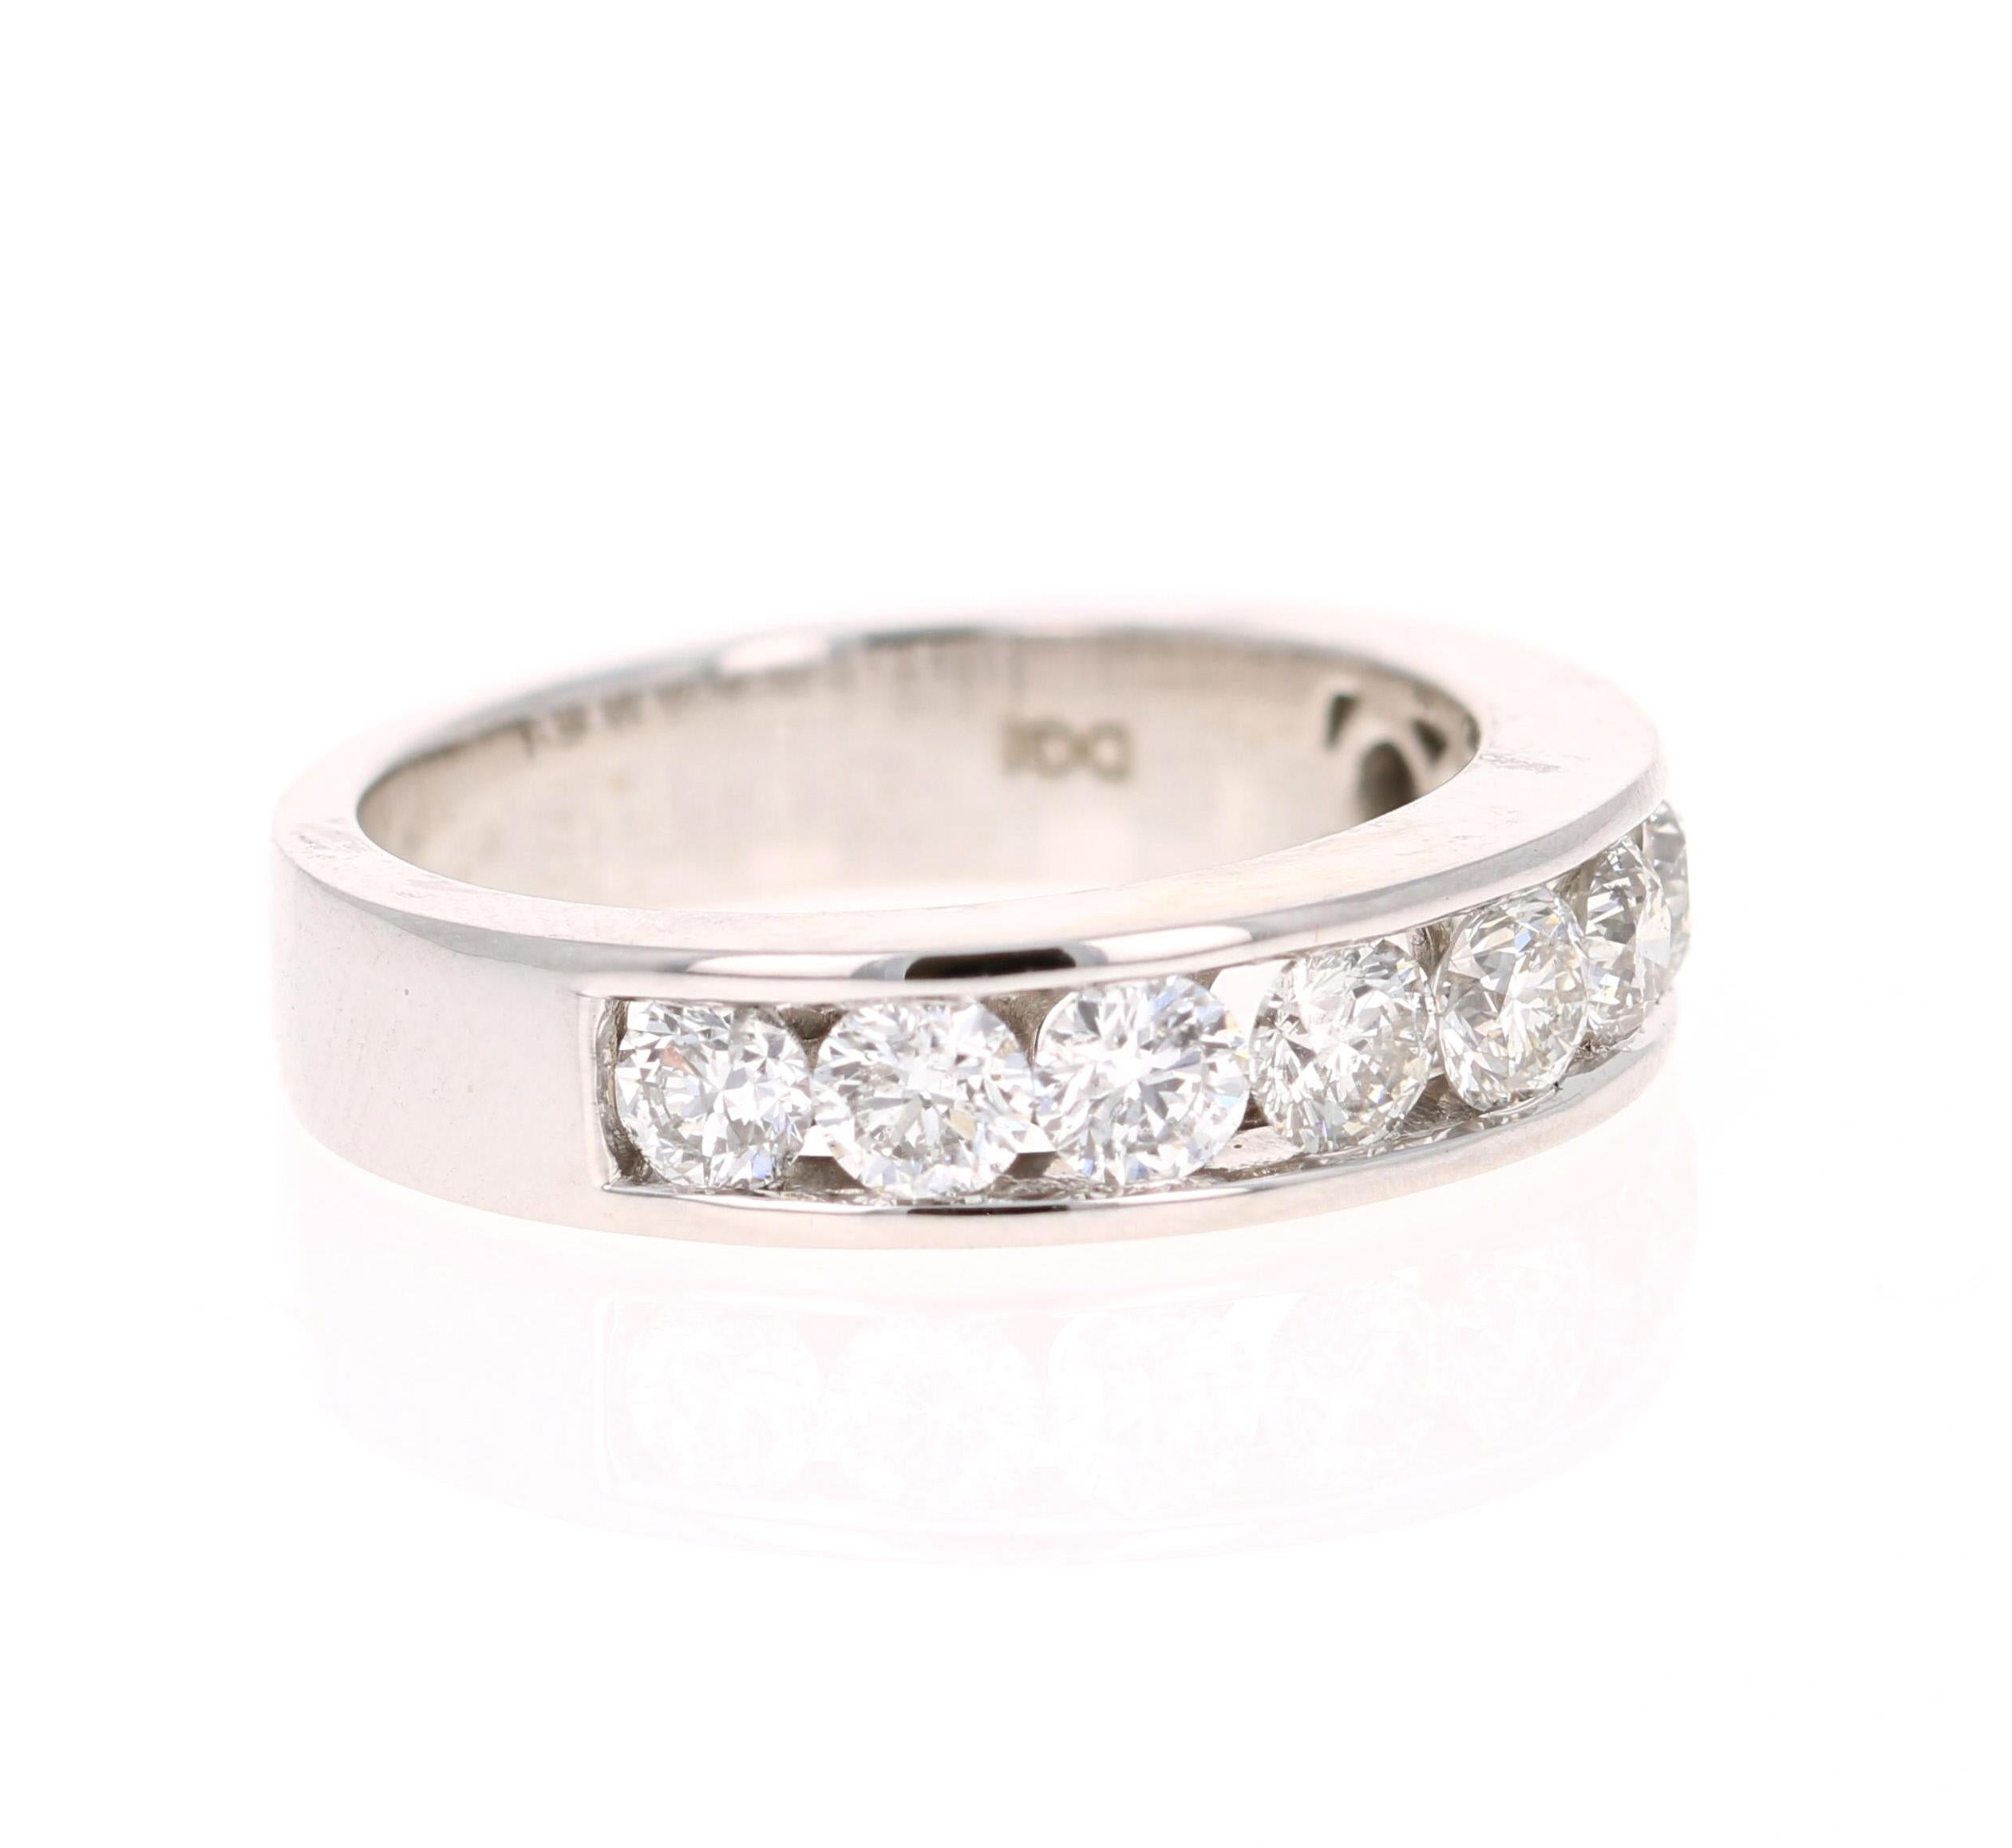 
Beautiful Diamond Band that has 9 Round Cut Diamonds and weighs 0.80 Carats.  The total carat weight of the band is 0.80 Carats. (Clarity: SI1, Color: I)

Curated in 14 Karat White Gold with an approximate gold weight of 5.9 grams. 

This band is a